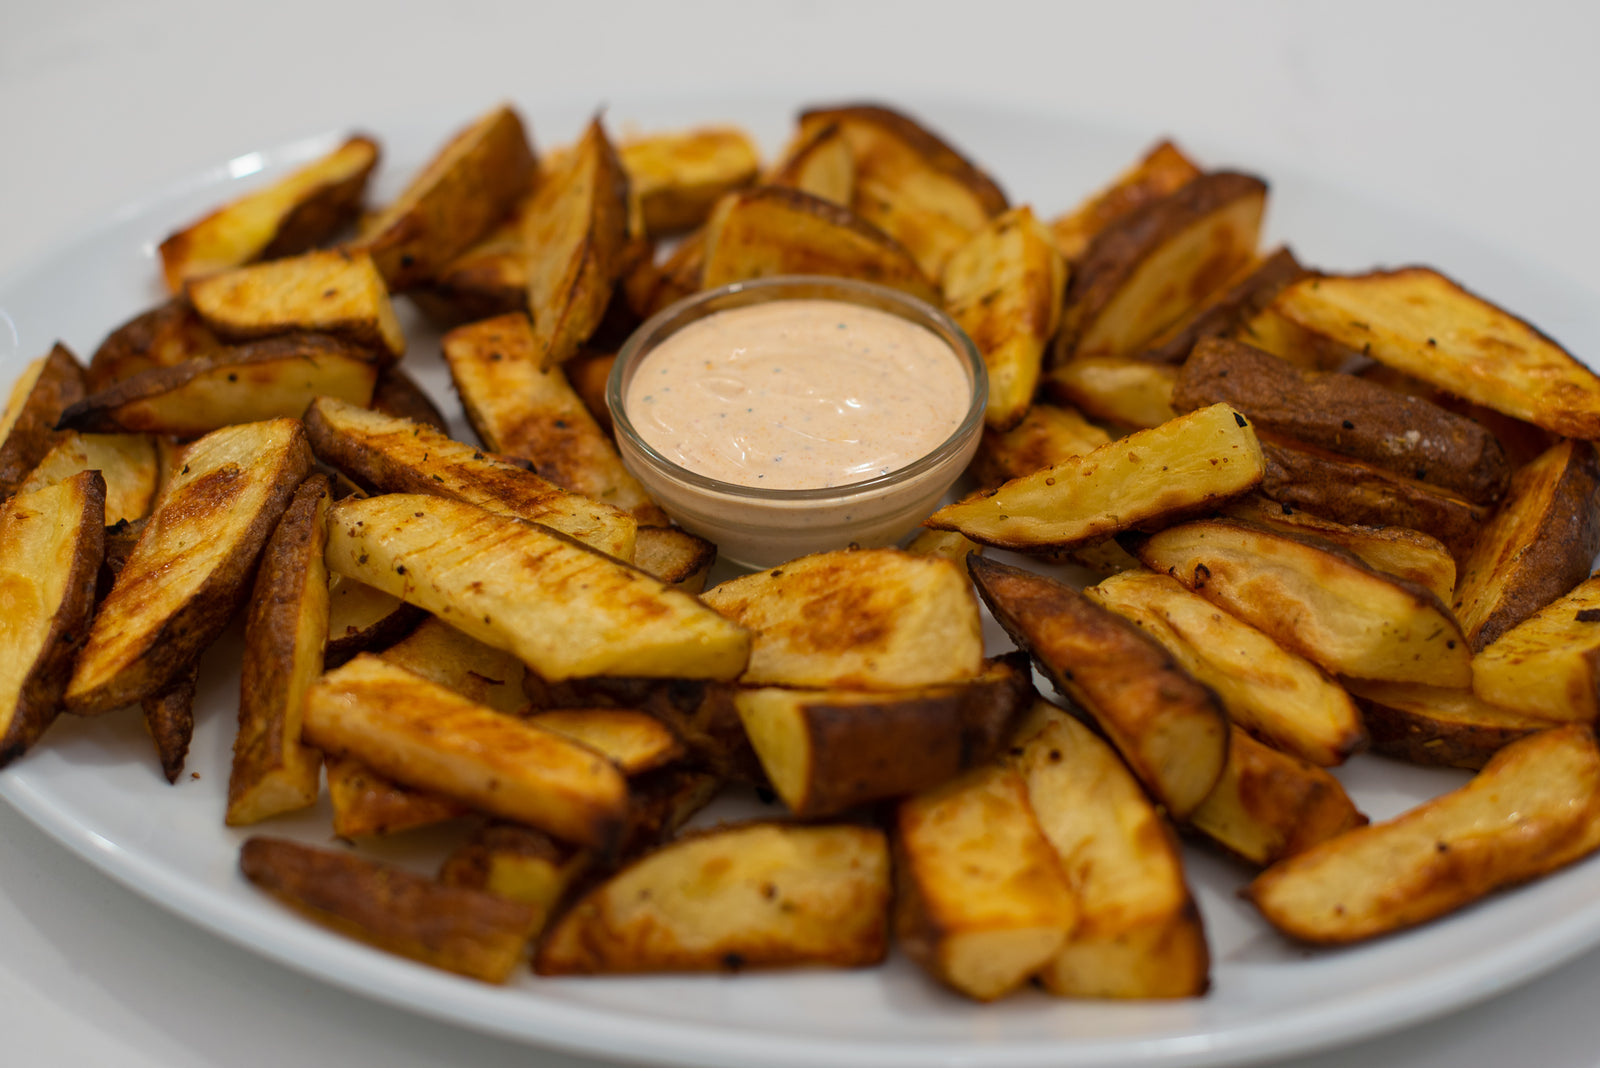 Wedge Cut Fries with Smoked Spice Dip